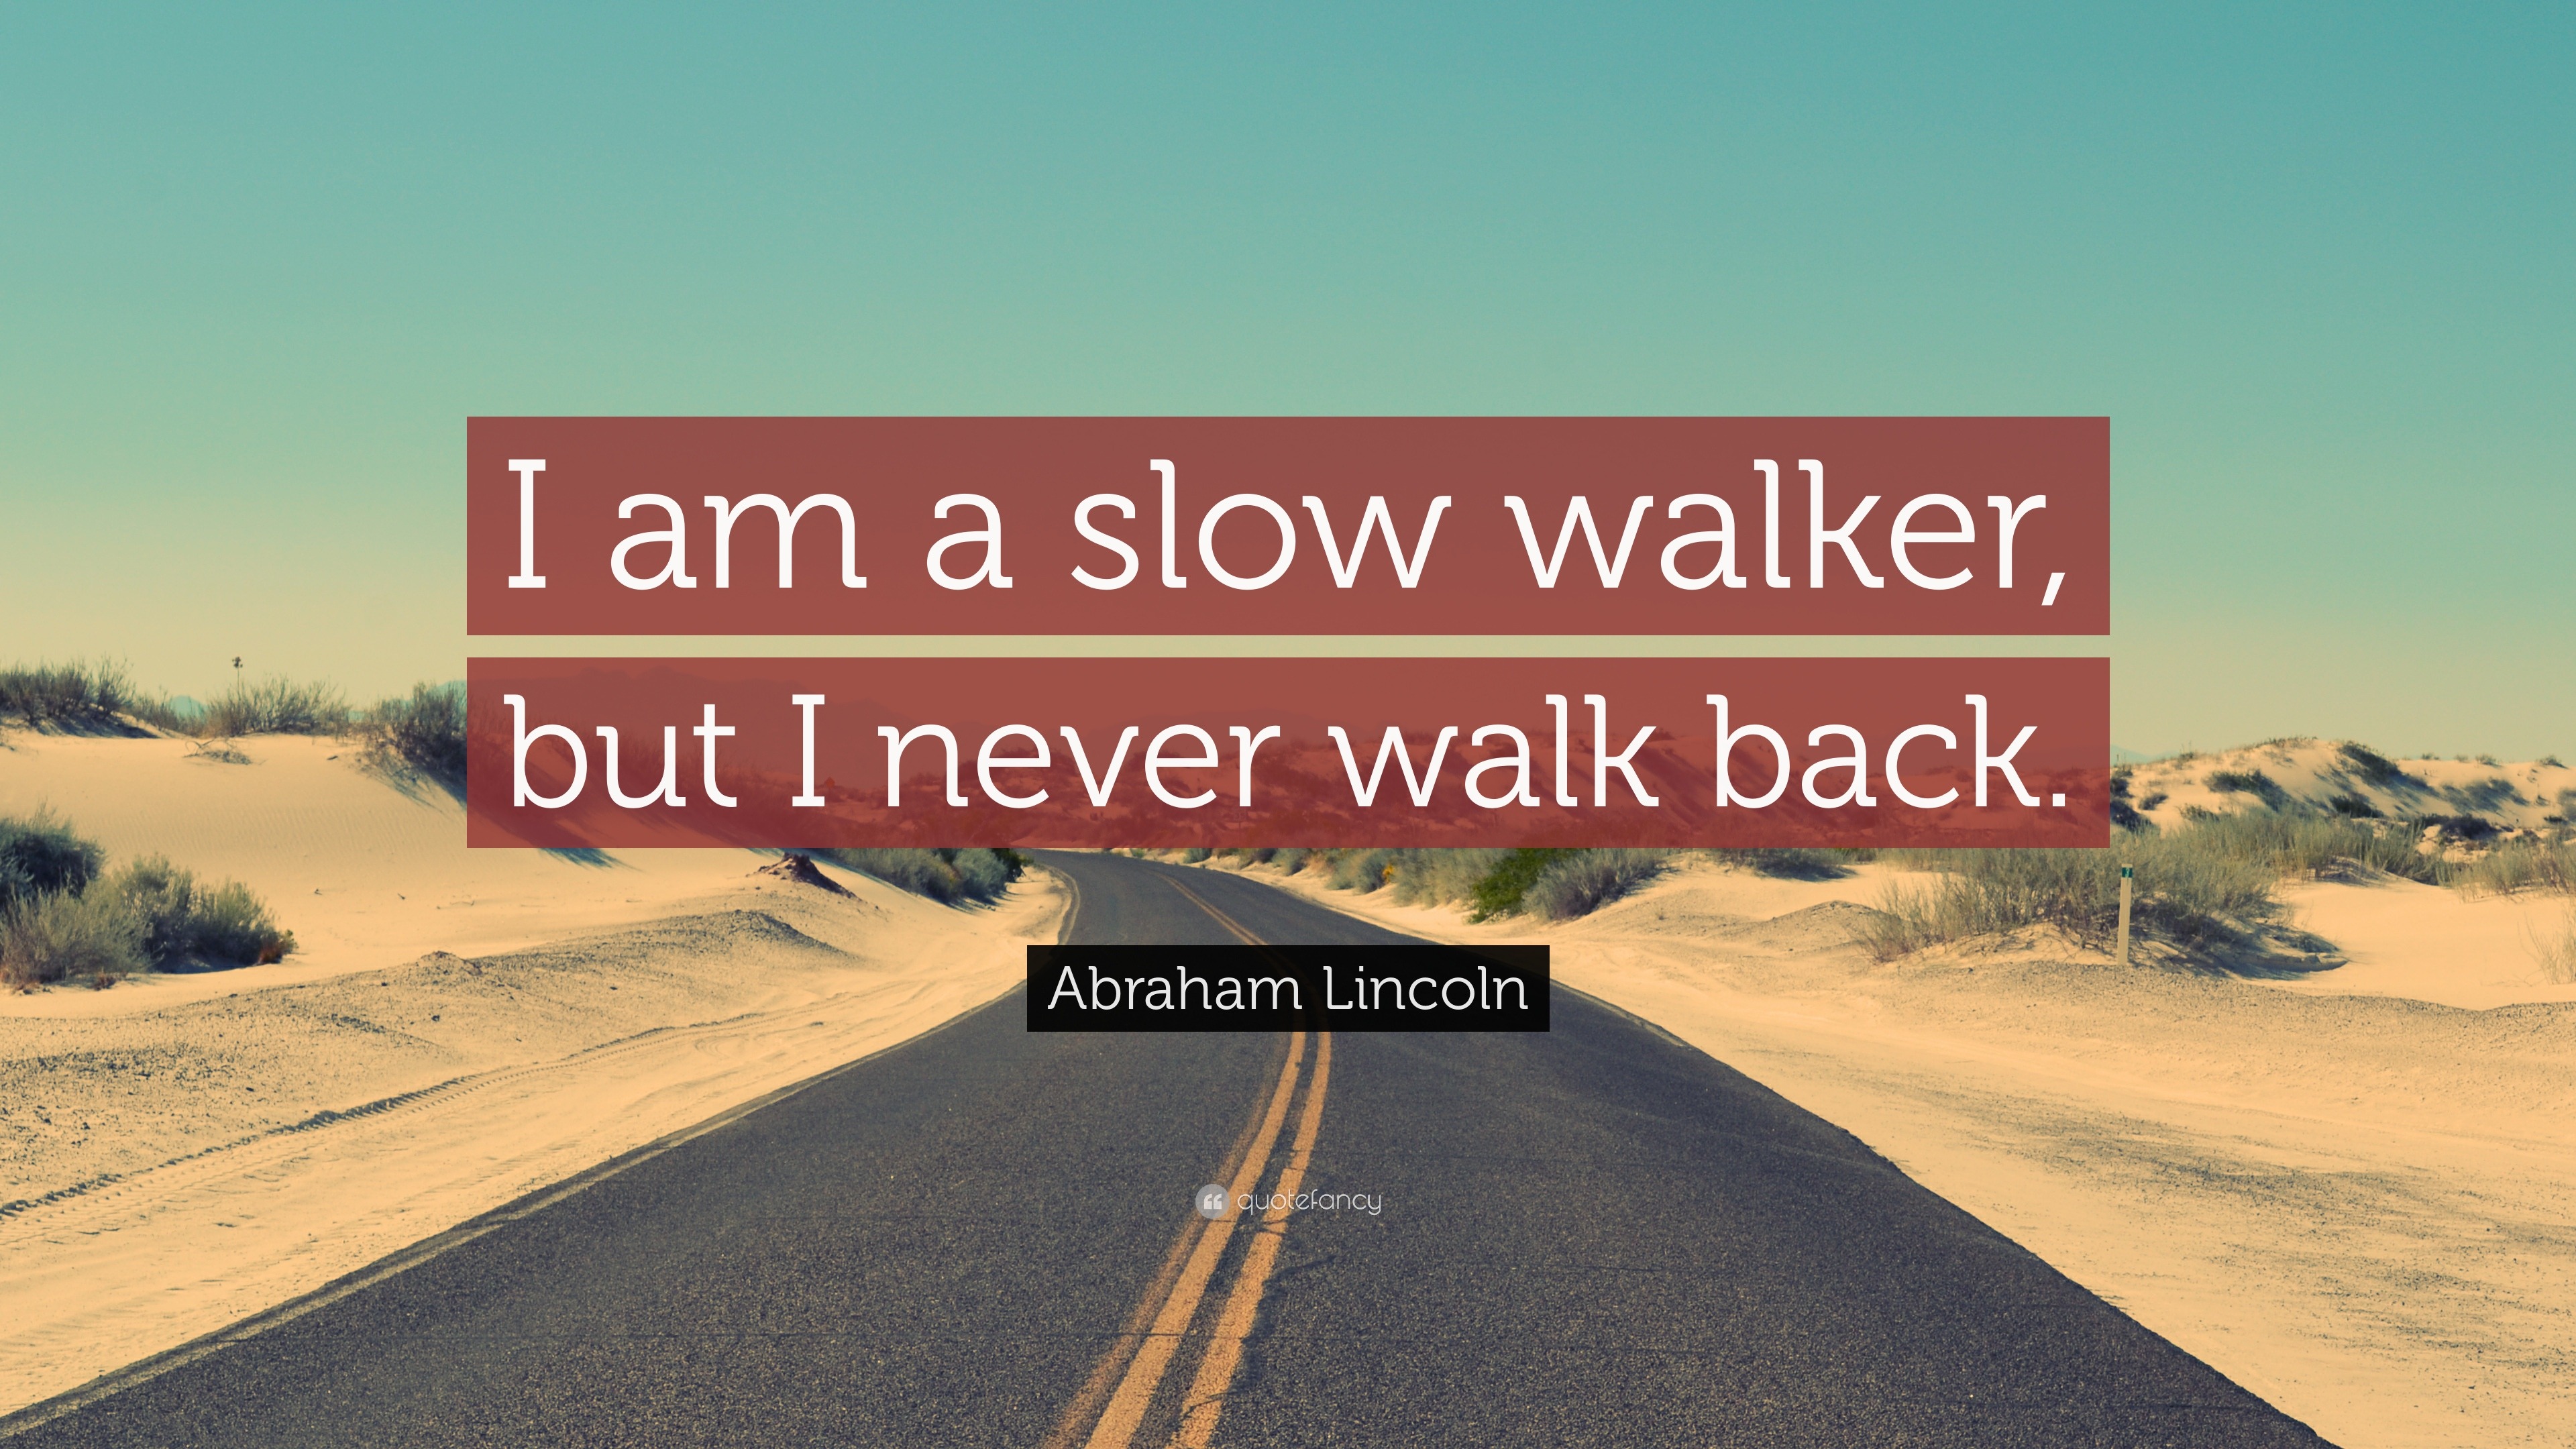 Abraham Lincoln Quote: “I am a slow walker, but I never walk back.”